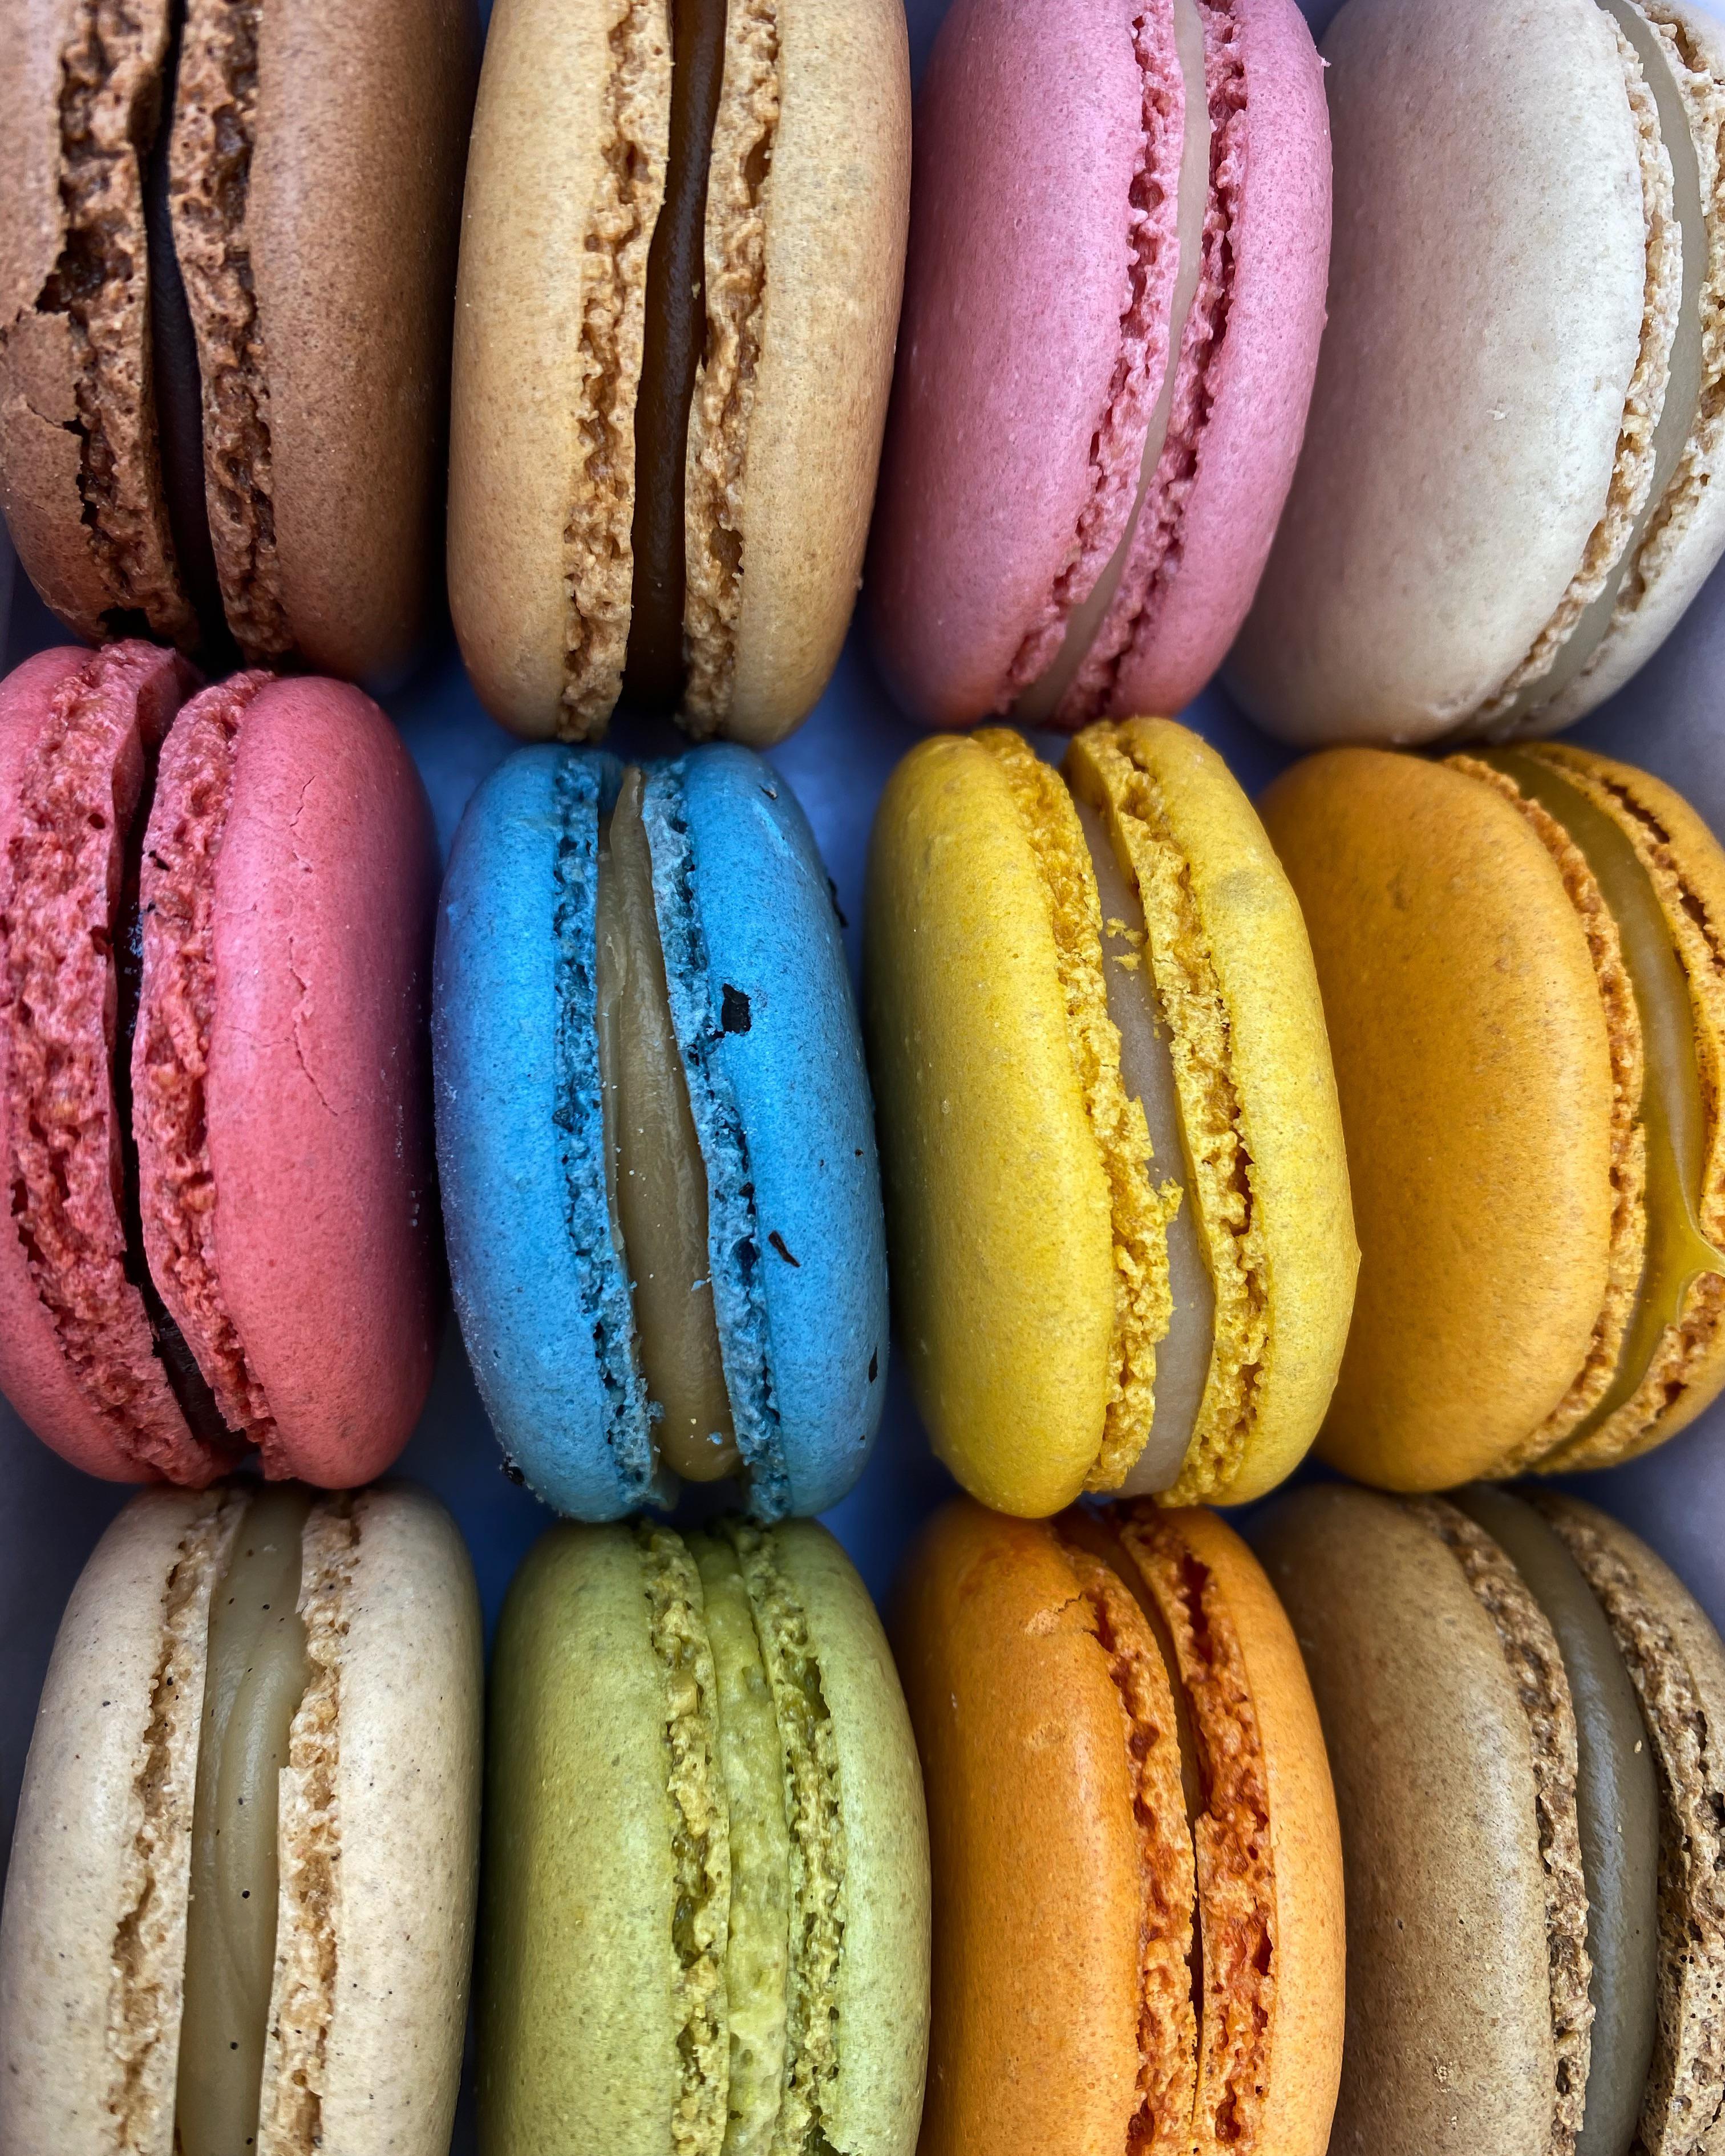 Download wallpaper 938x1668 macaron, dessert, cookies, cake, colorful  iphone 8/7/6s/6 for parallax hd background